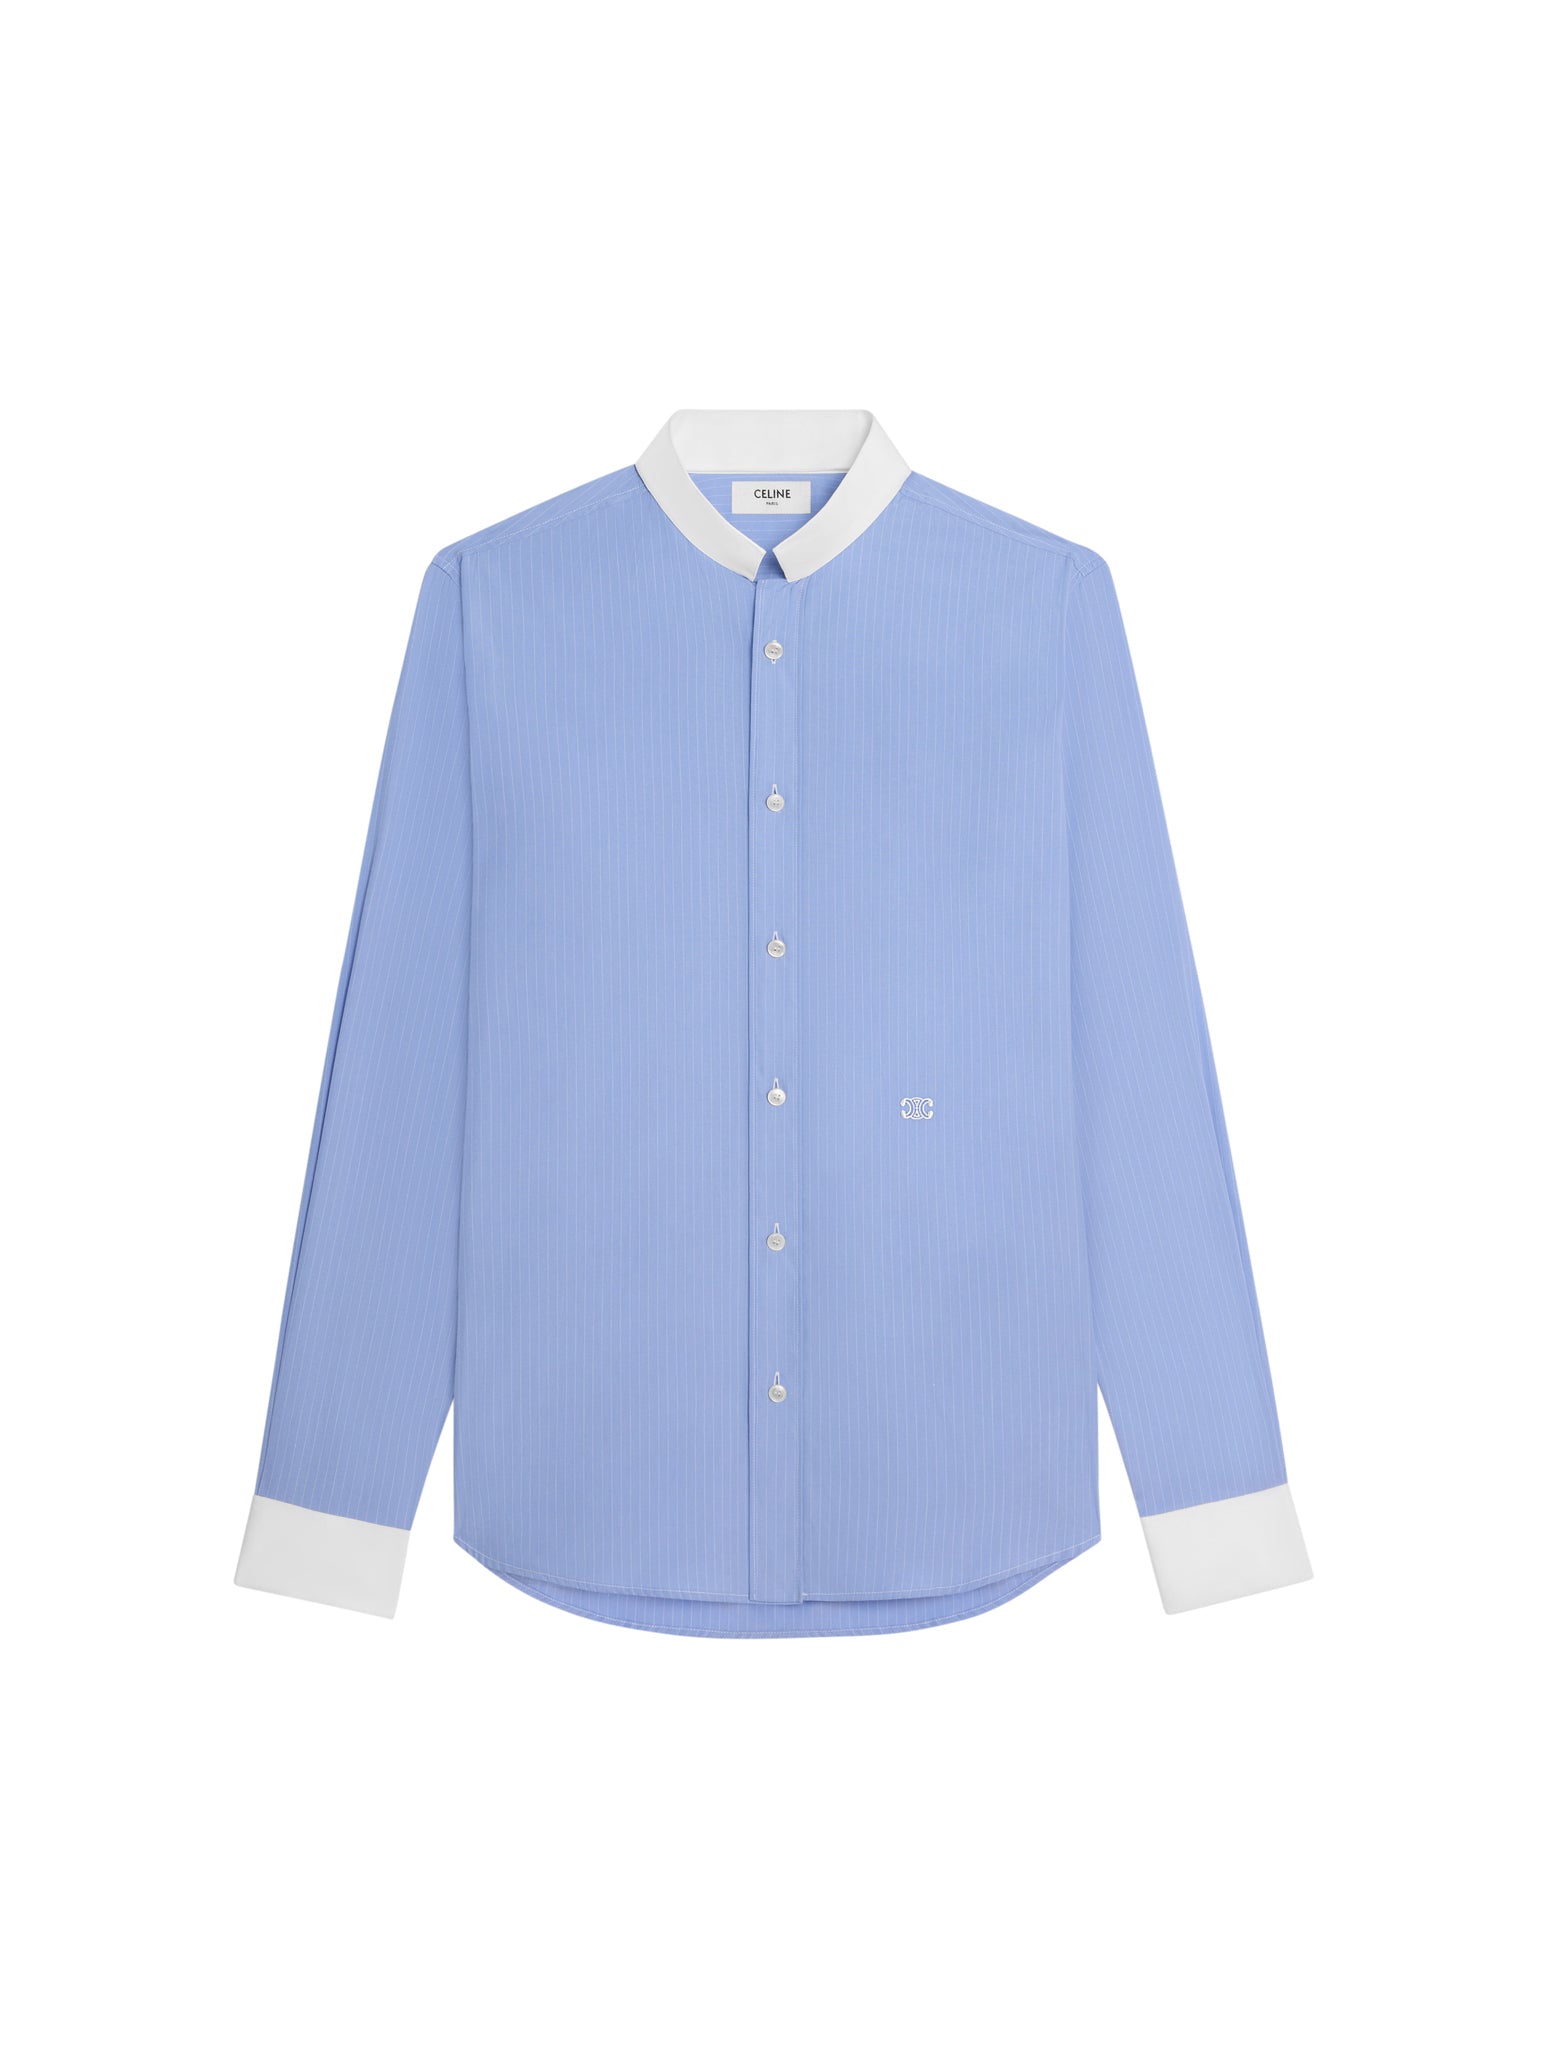 LOOSE SHIRT WITH REVERSE COLLAR IN STRIPED COTTON SKY BLUE / CHALK